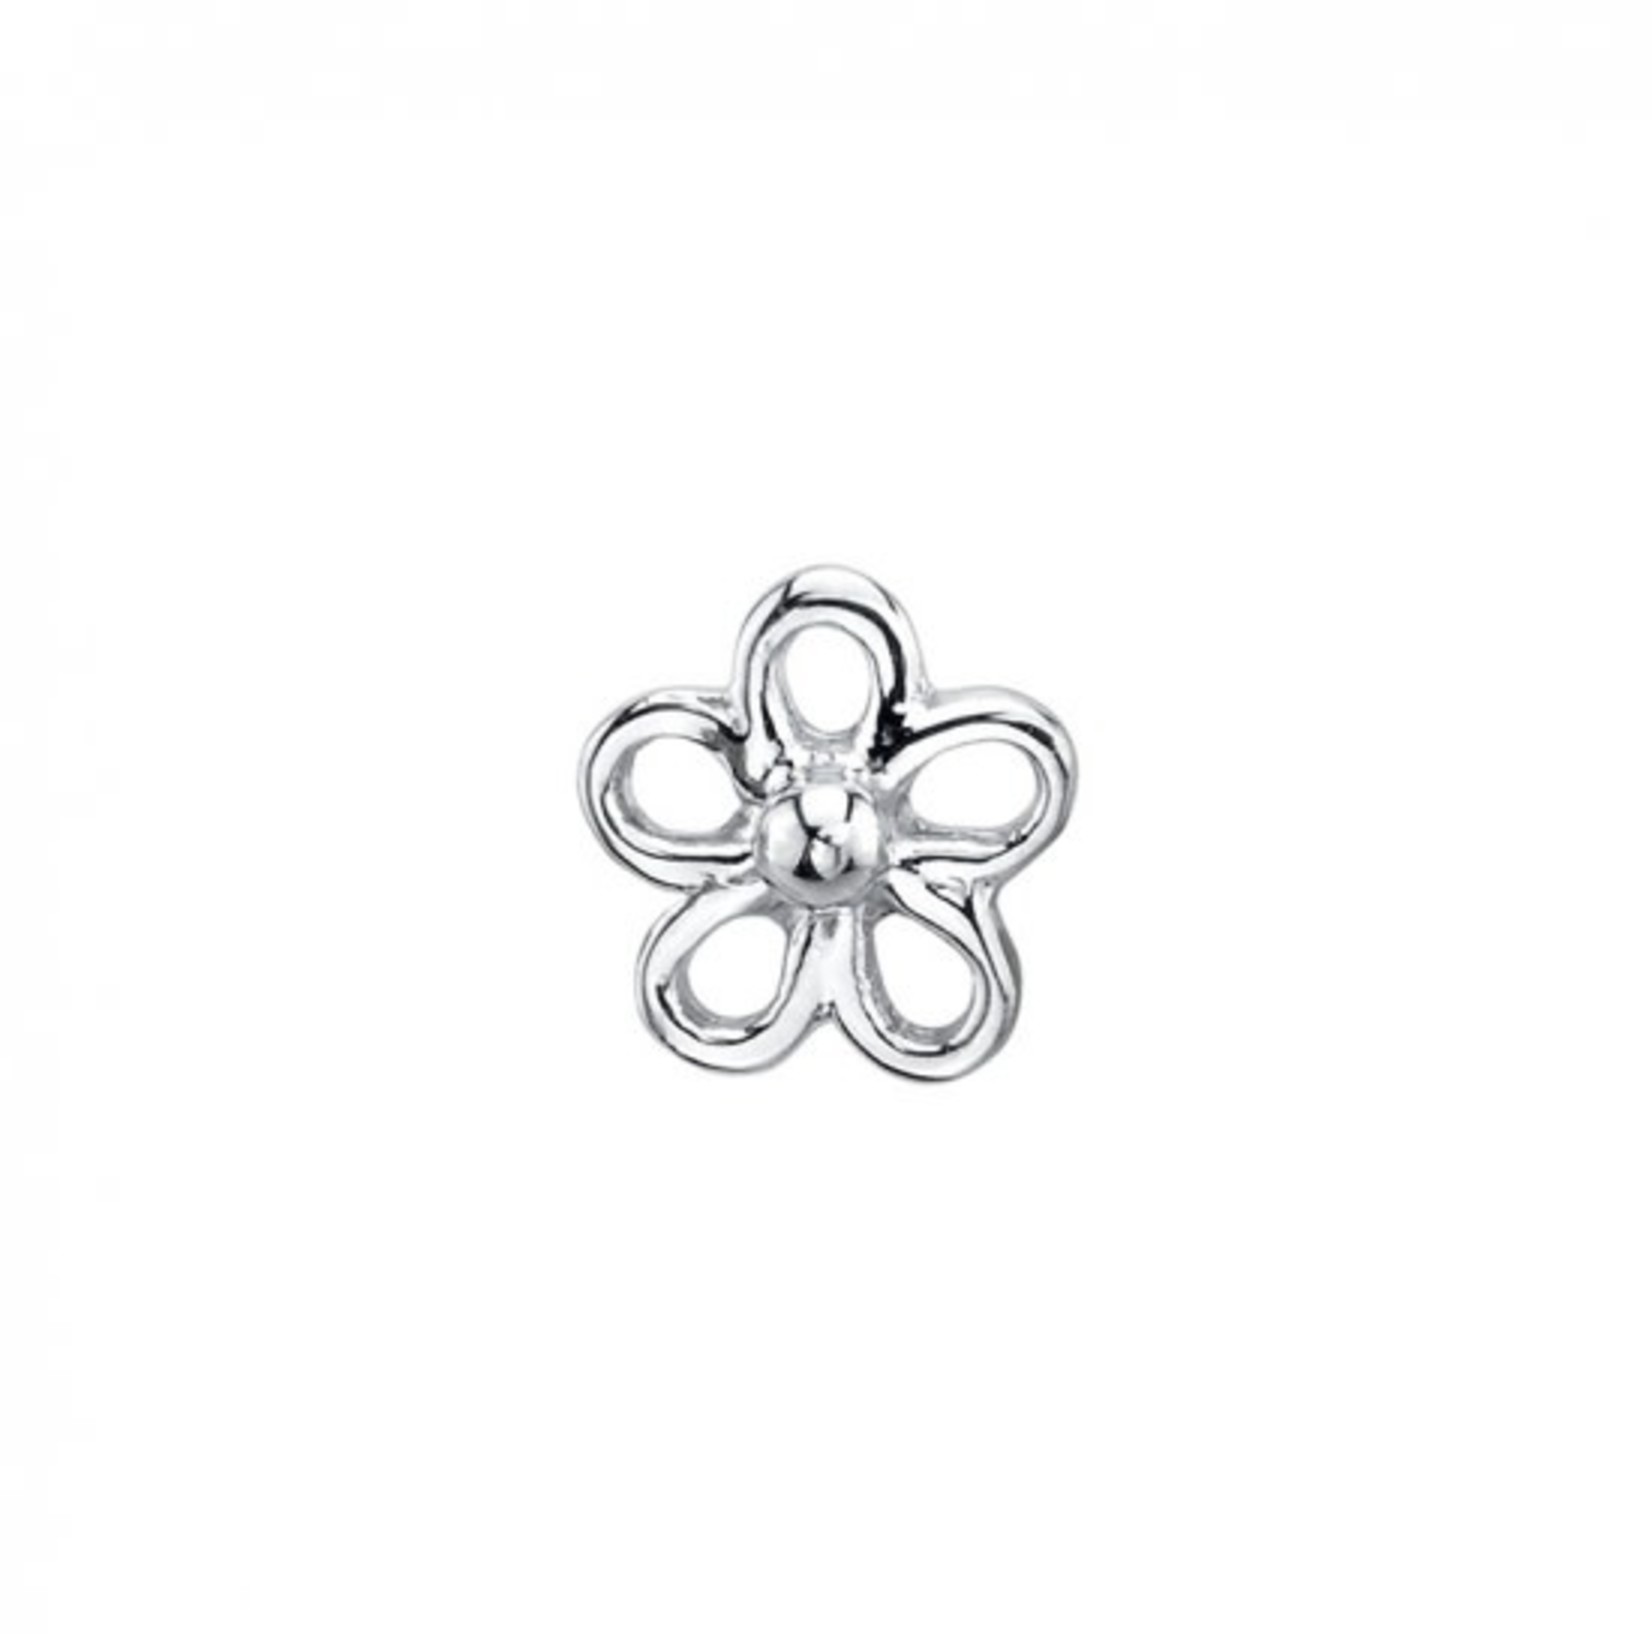 BVLA BVLA "Loopy Flower" threaded end